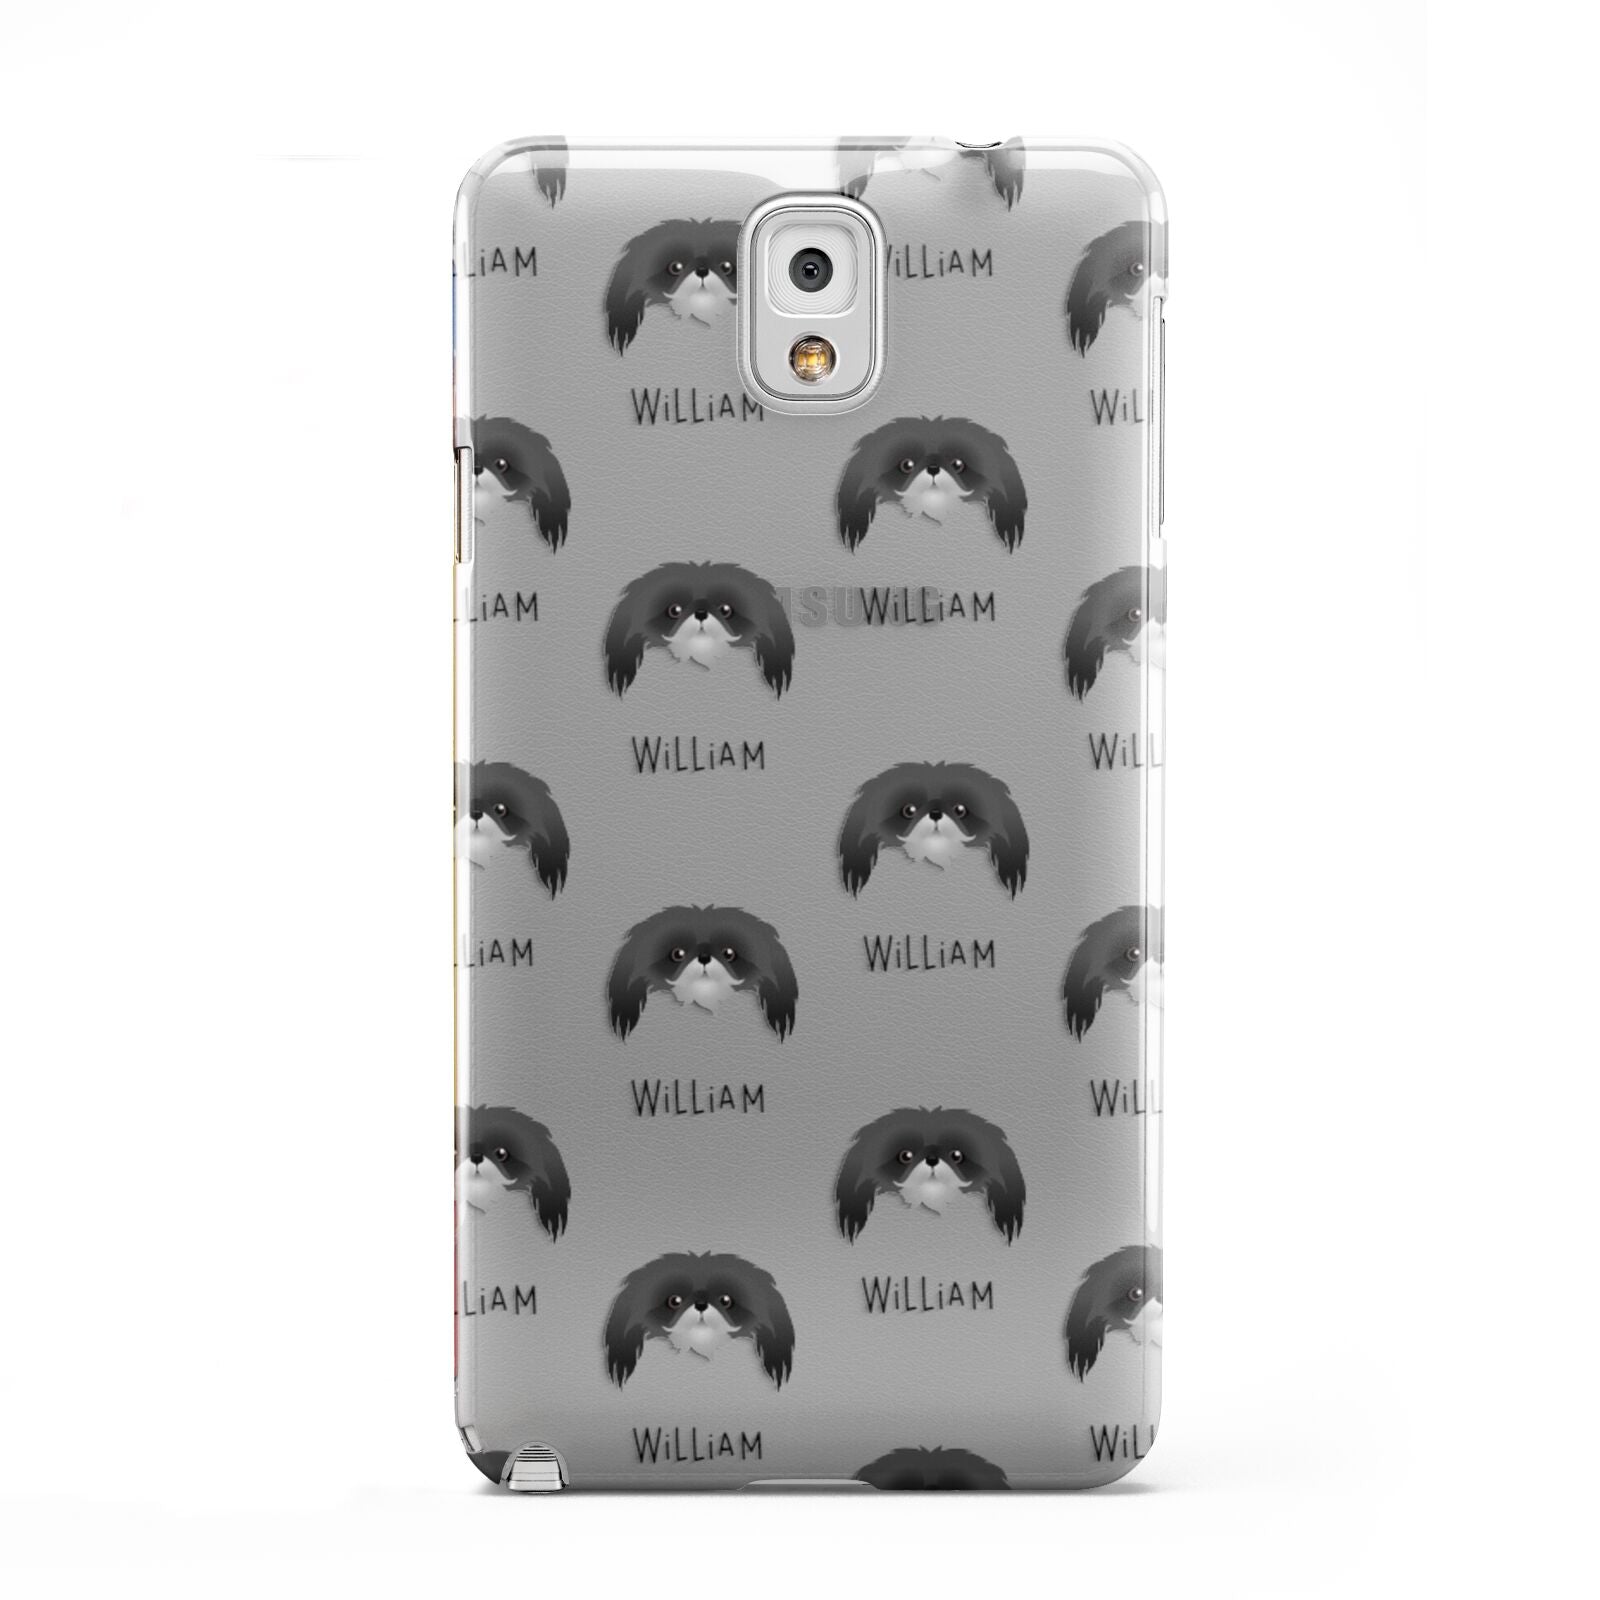 Pekingese Icon with Name Samsung Galaxy Note 3 Case